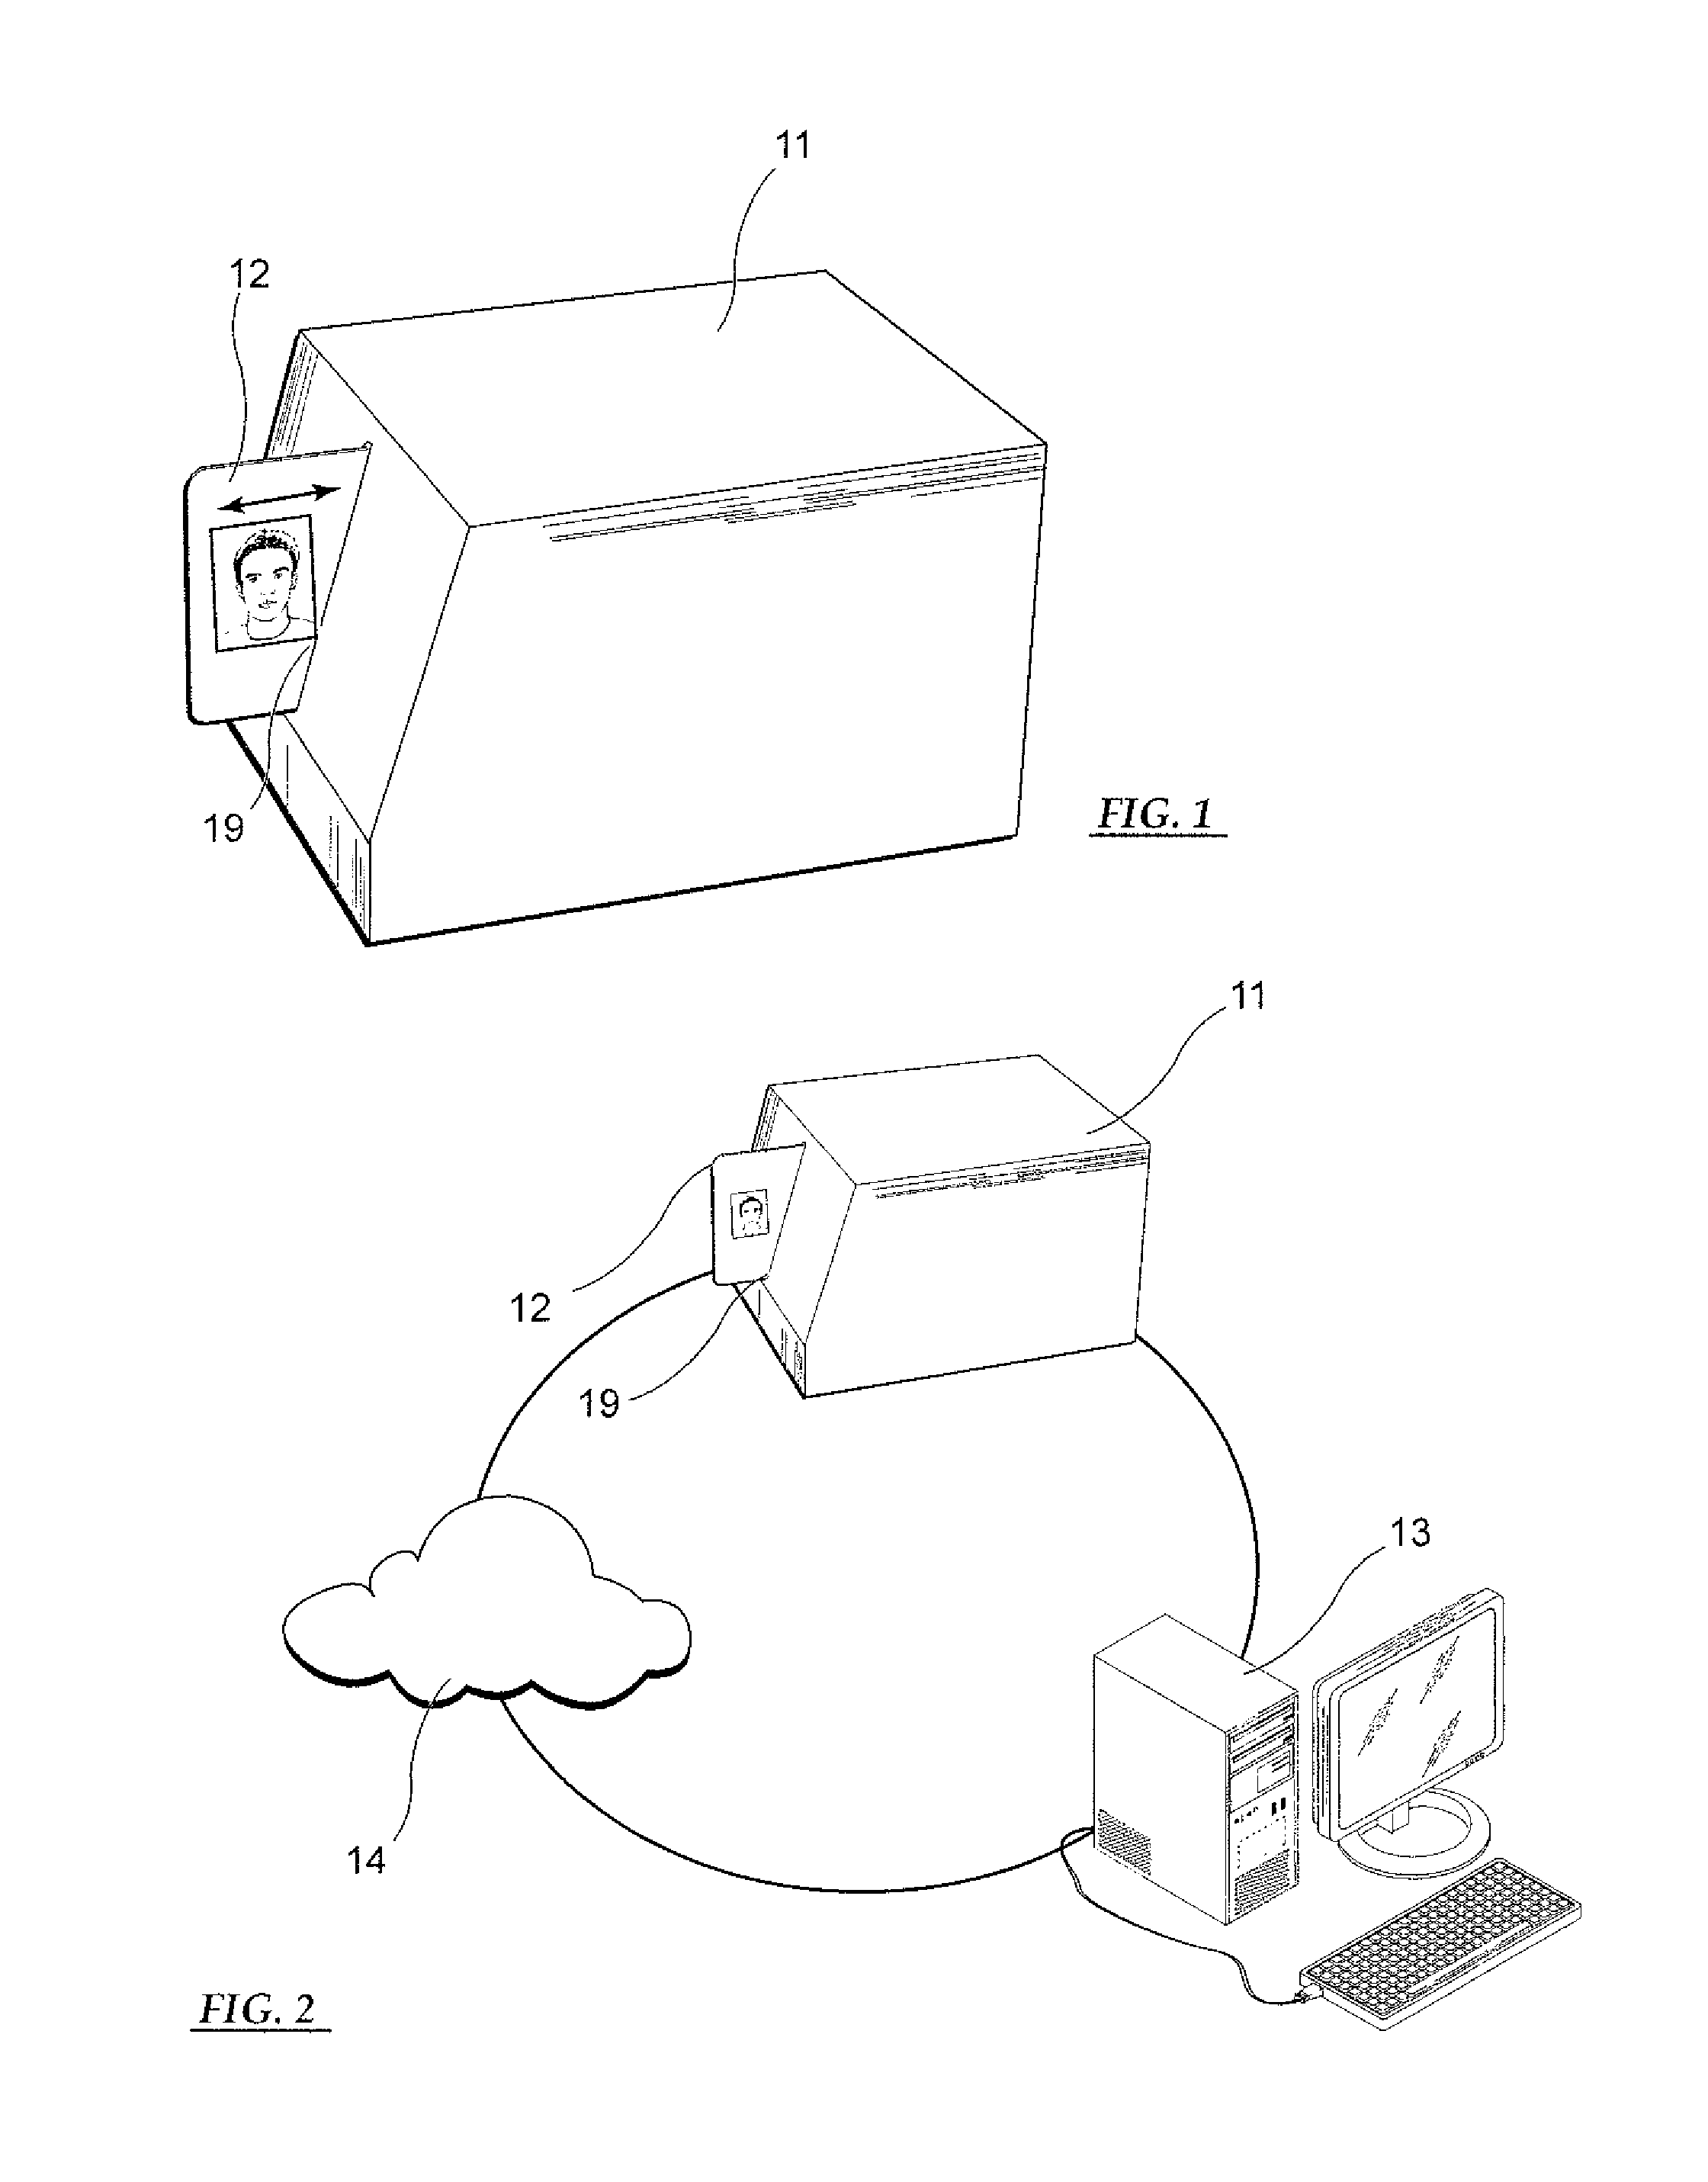 Method for Scanning and Processing Documents